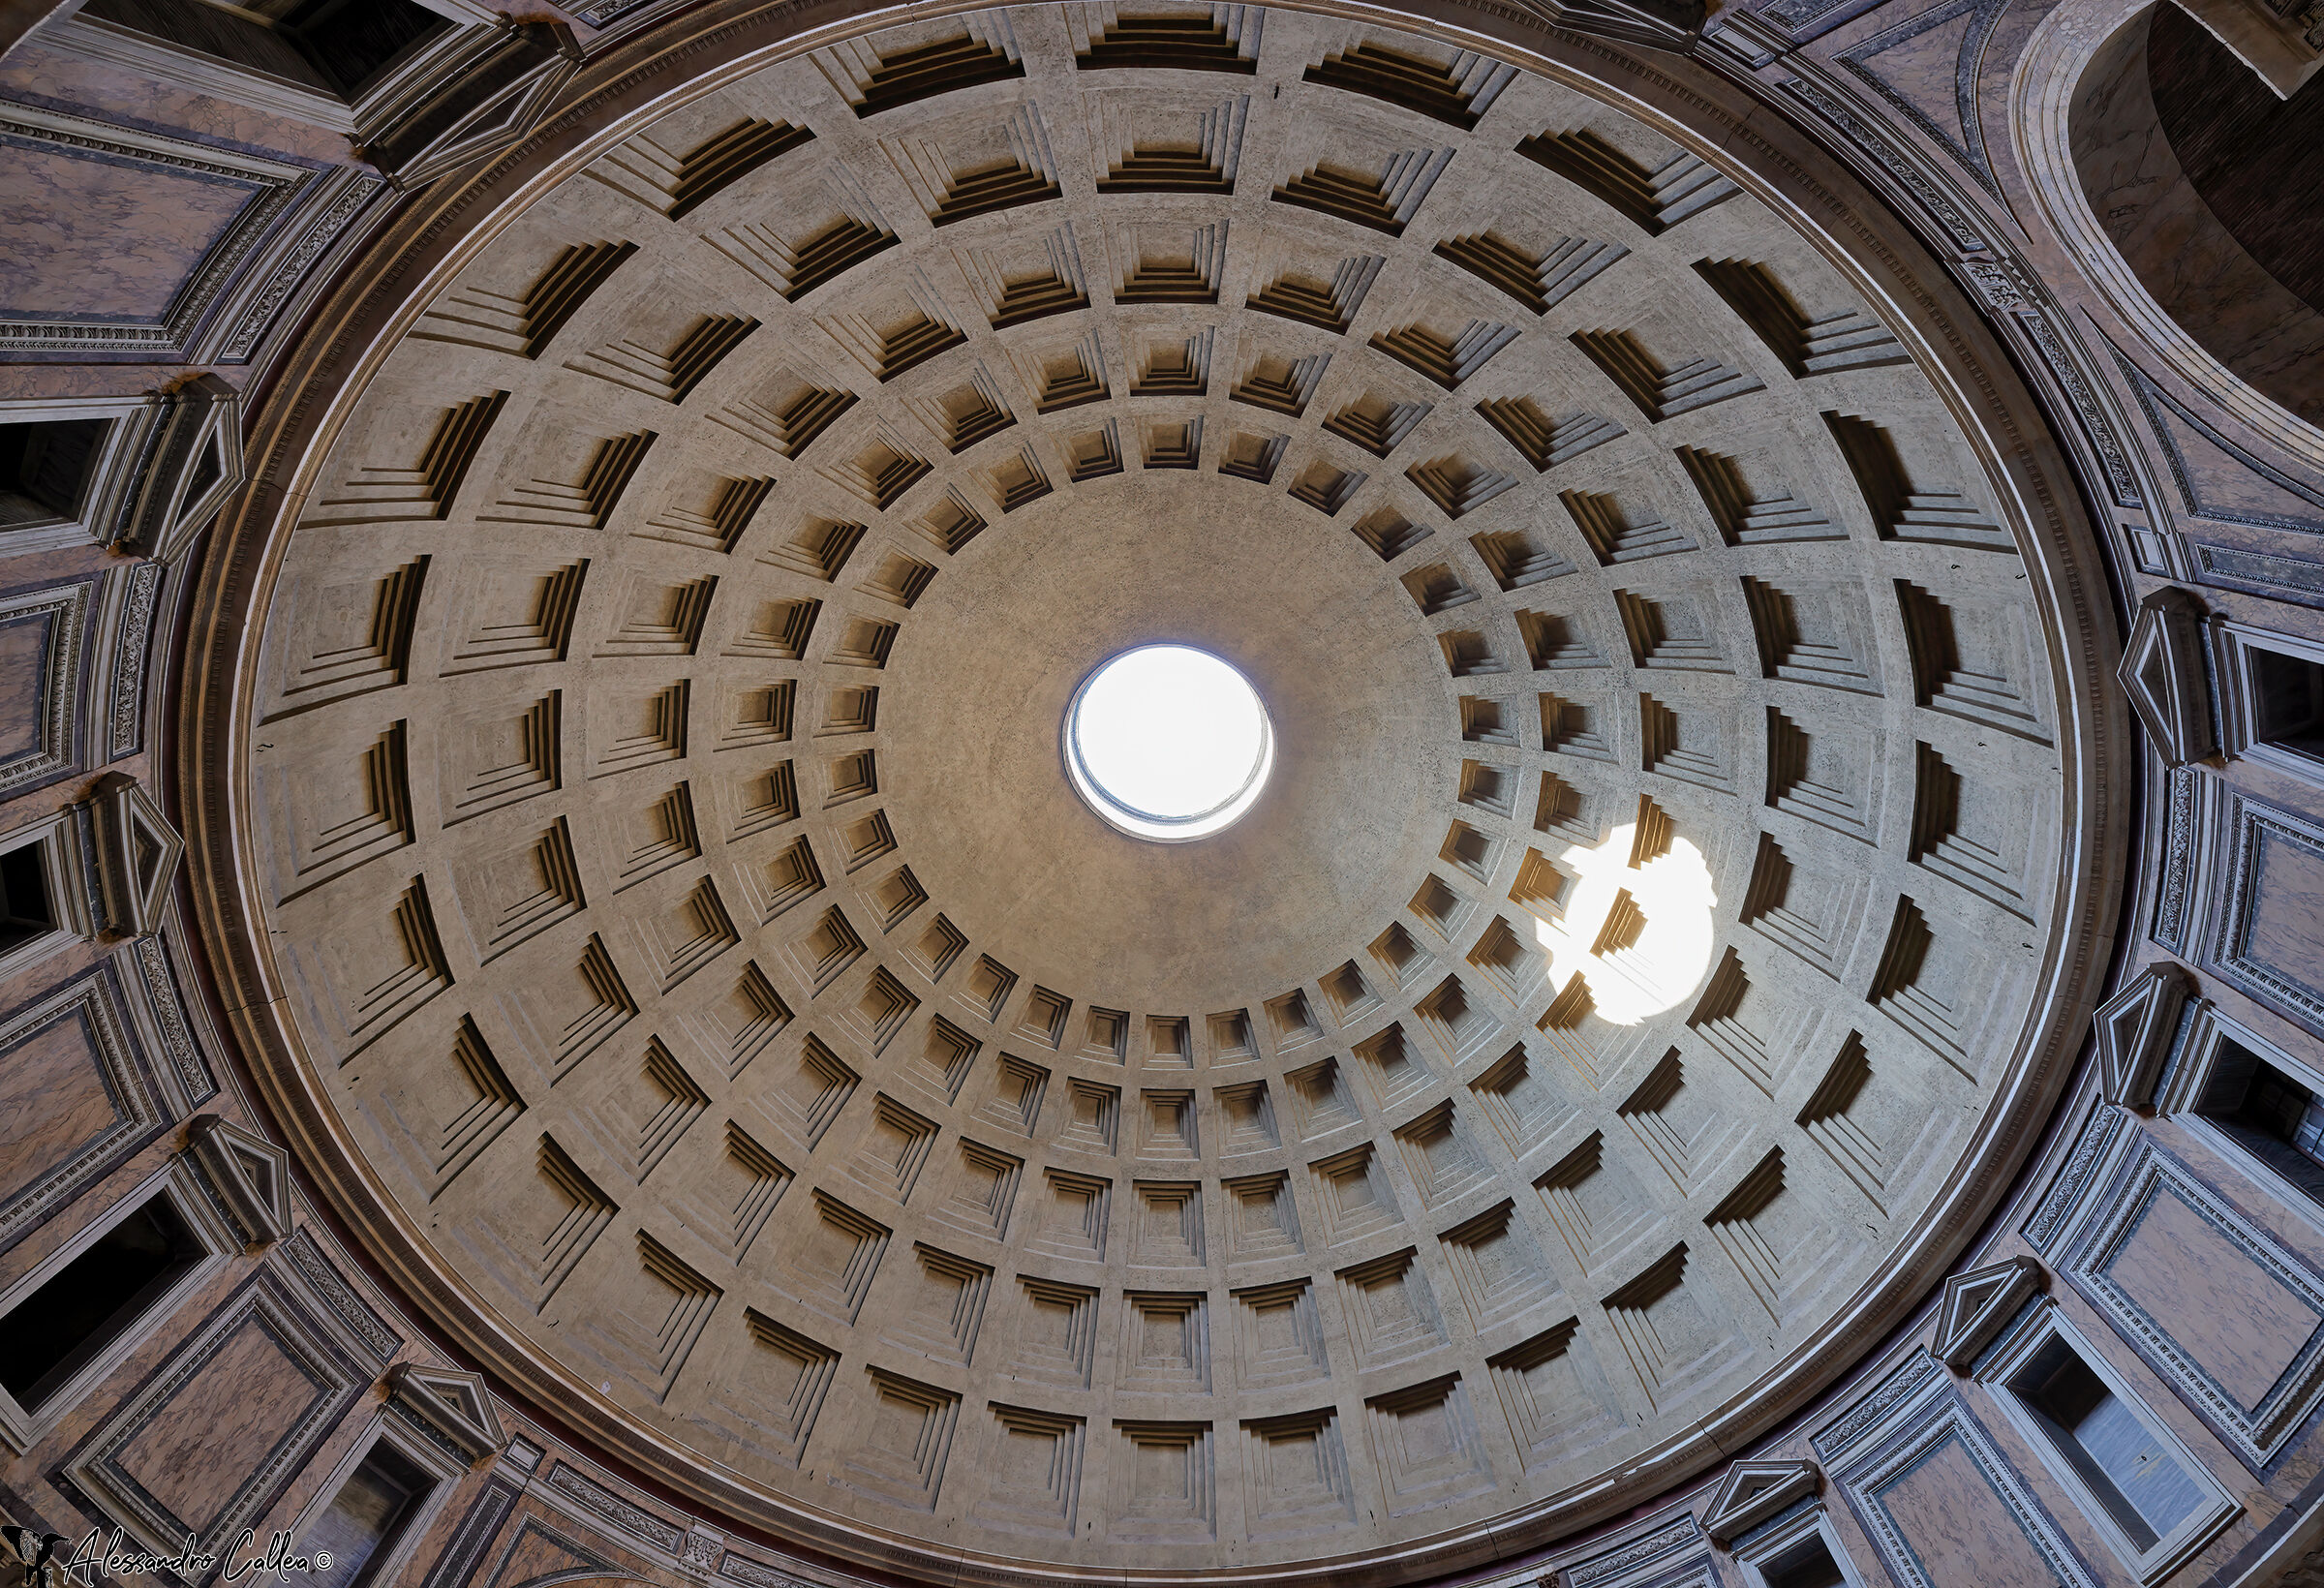 The Vault of the Pantheon...